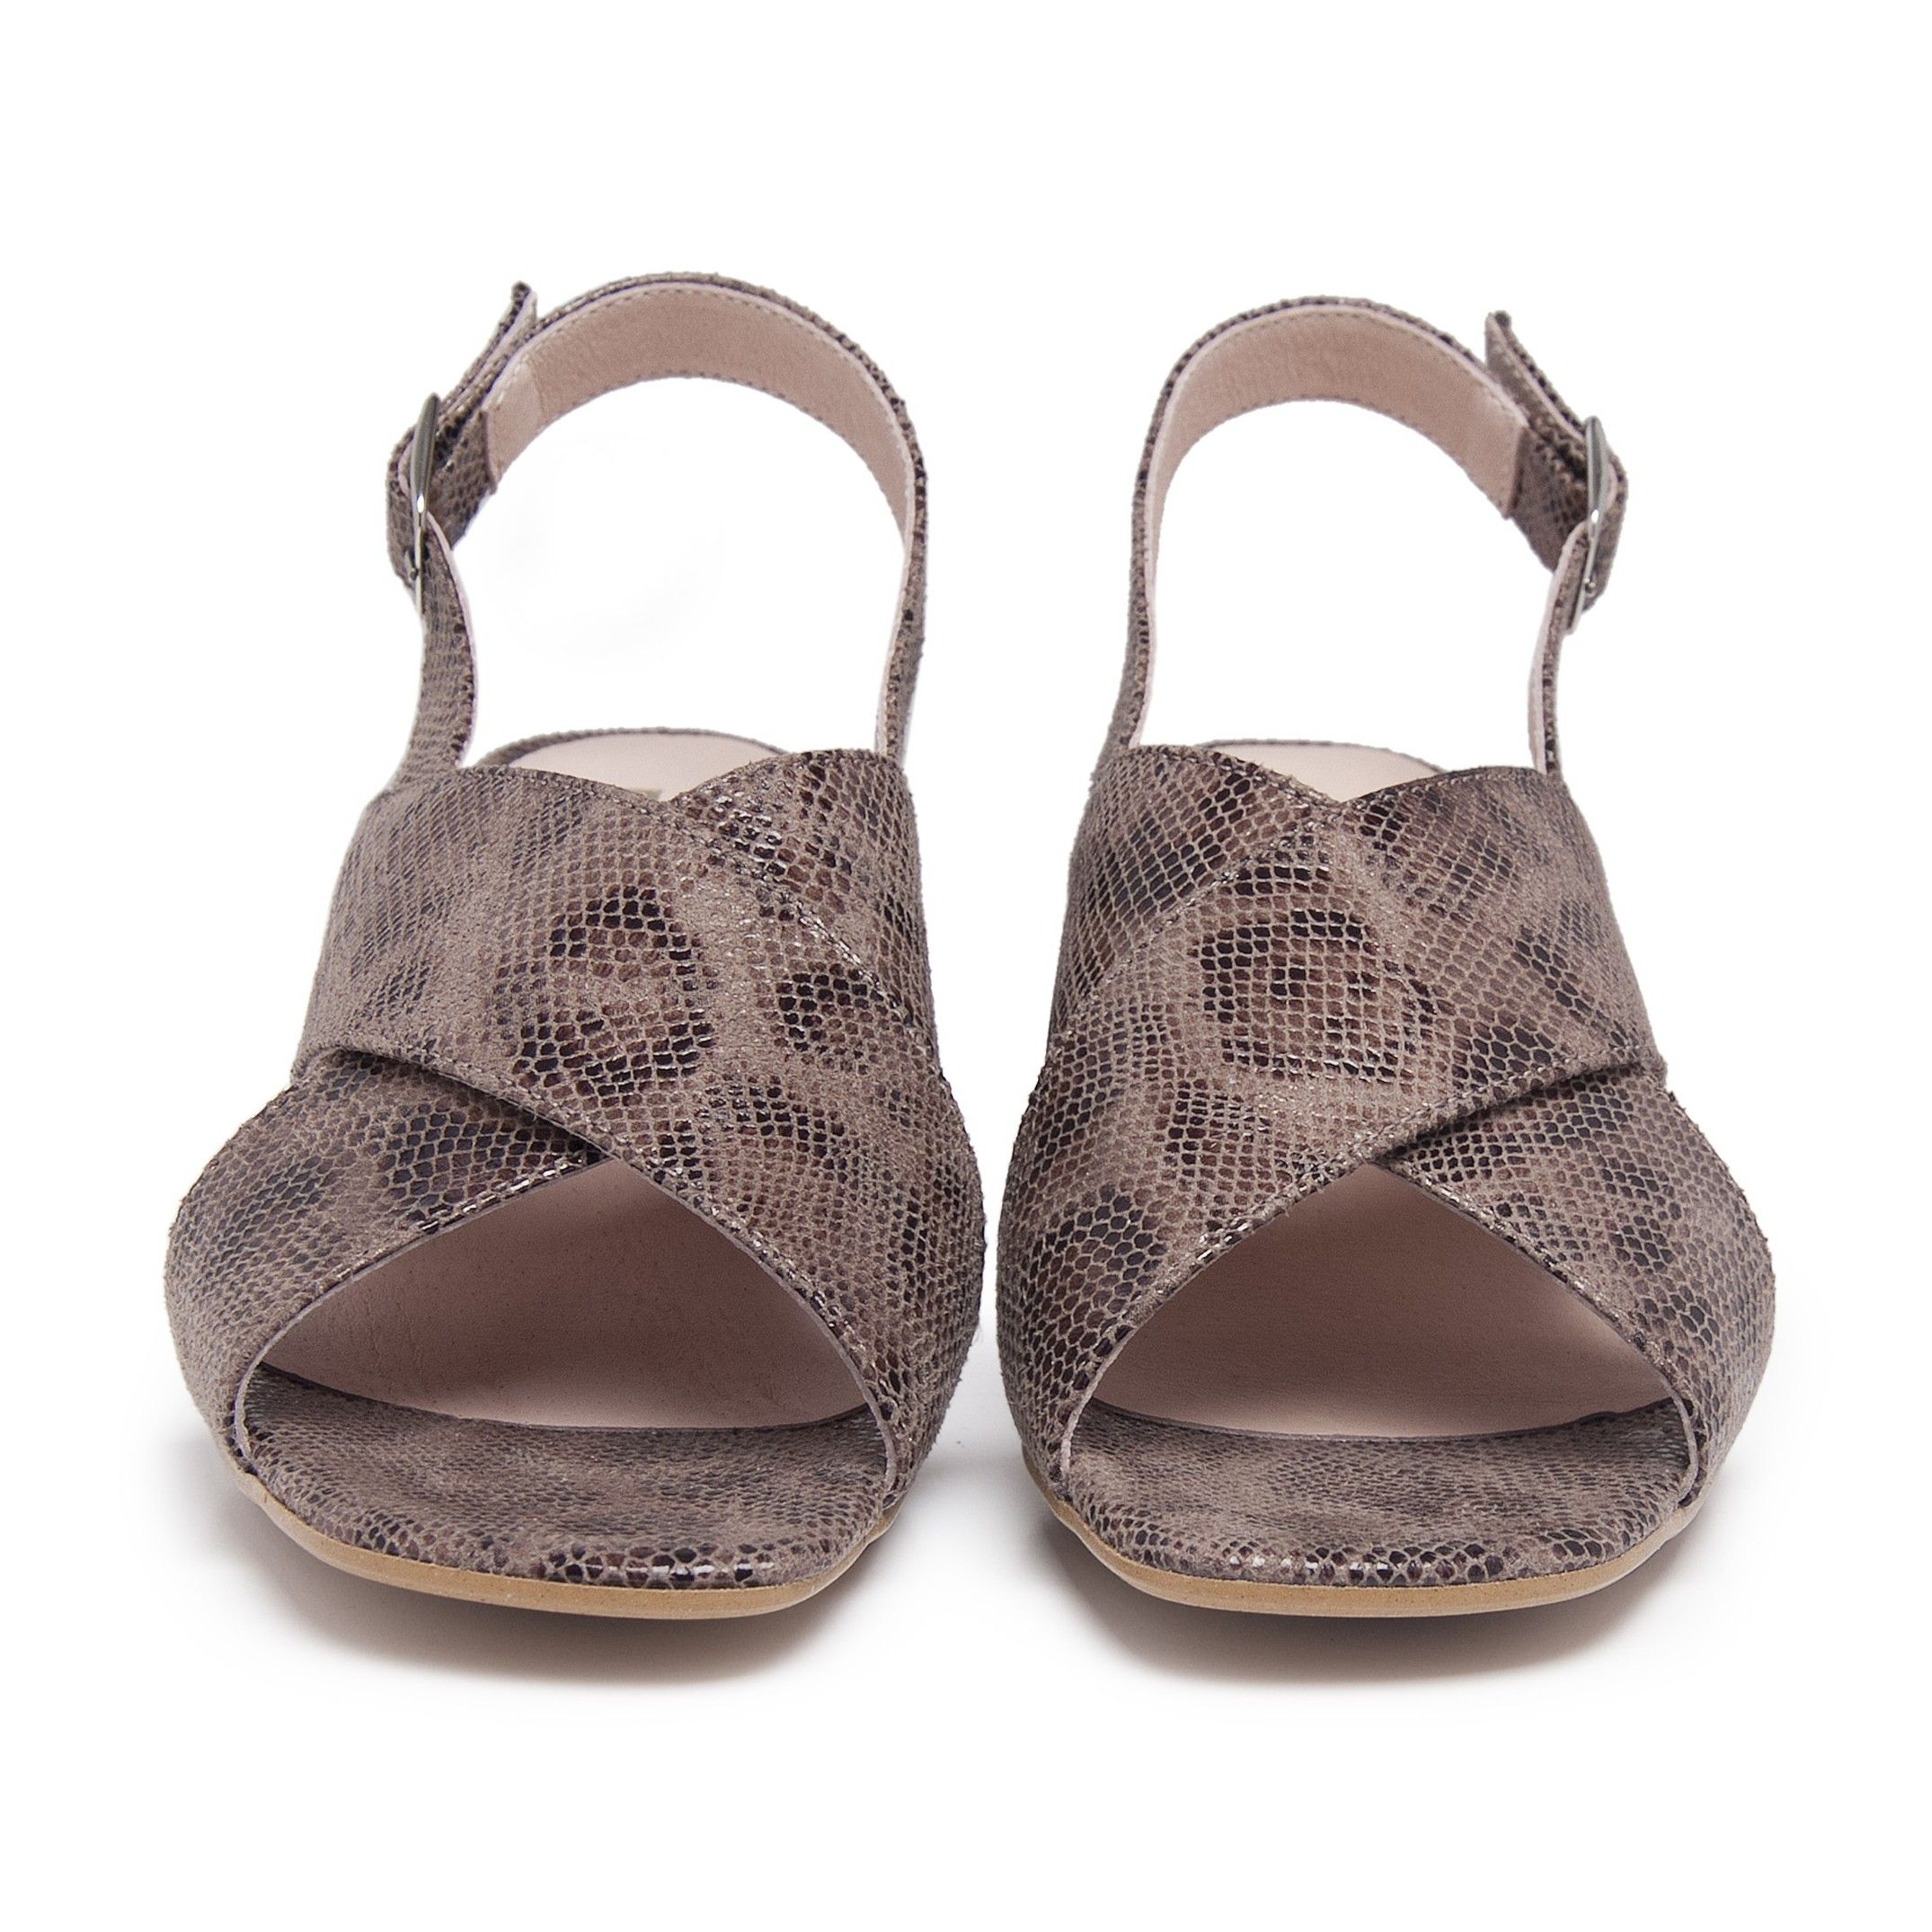 Leather sandals with straps and half-height heel. Adjustable closure with metal buckle. Upper made of synthetic. Inner made of leather. Insole made of leather. Heel: 5.5 cm. Sole: Cuerolite. This product is manufactured in Spain.